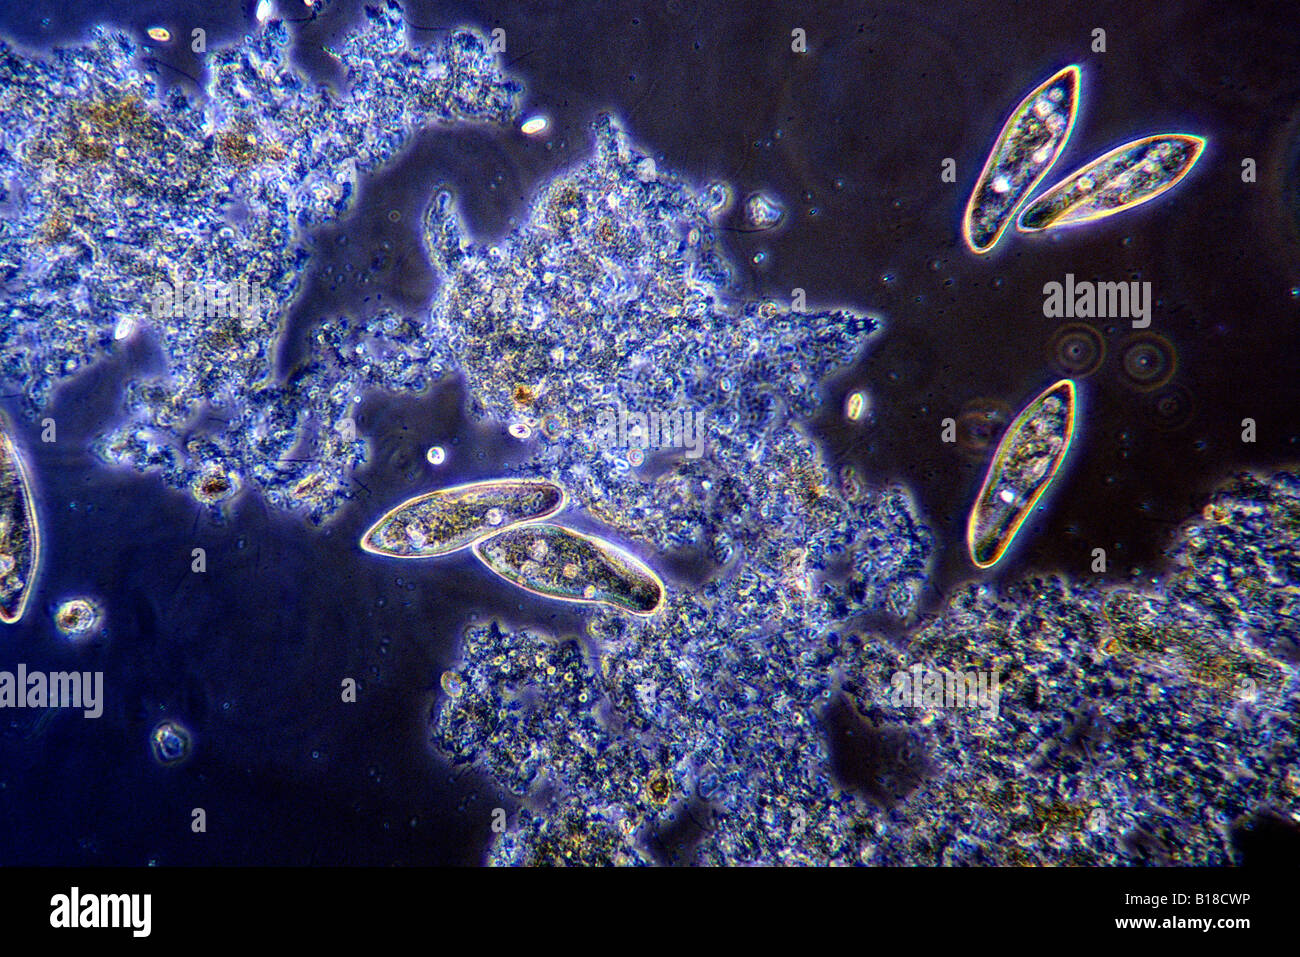 Paramecium in pond water under optical microscope Stock Photo